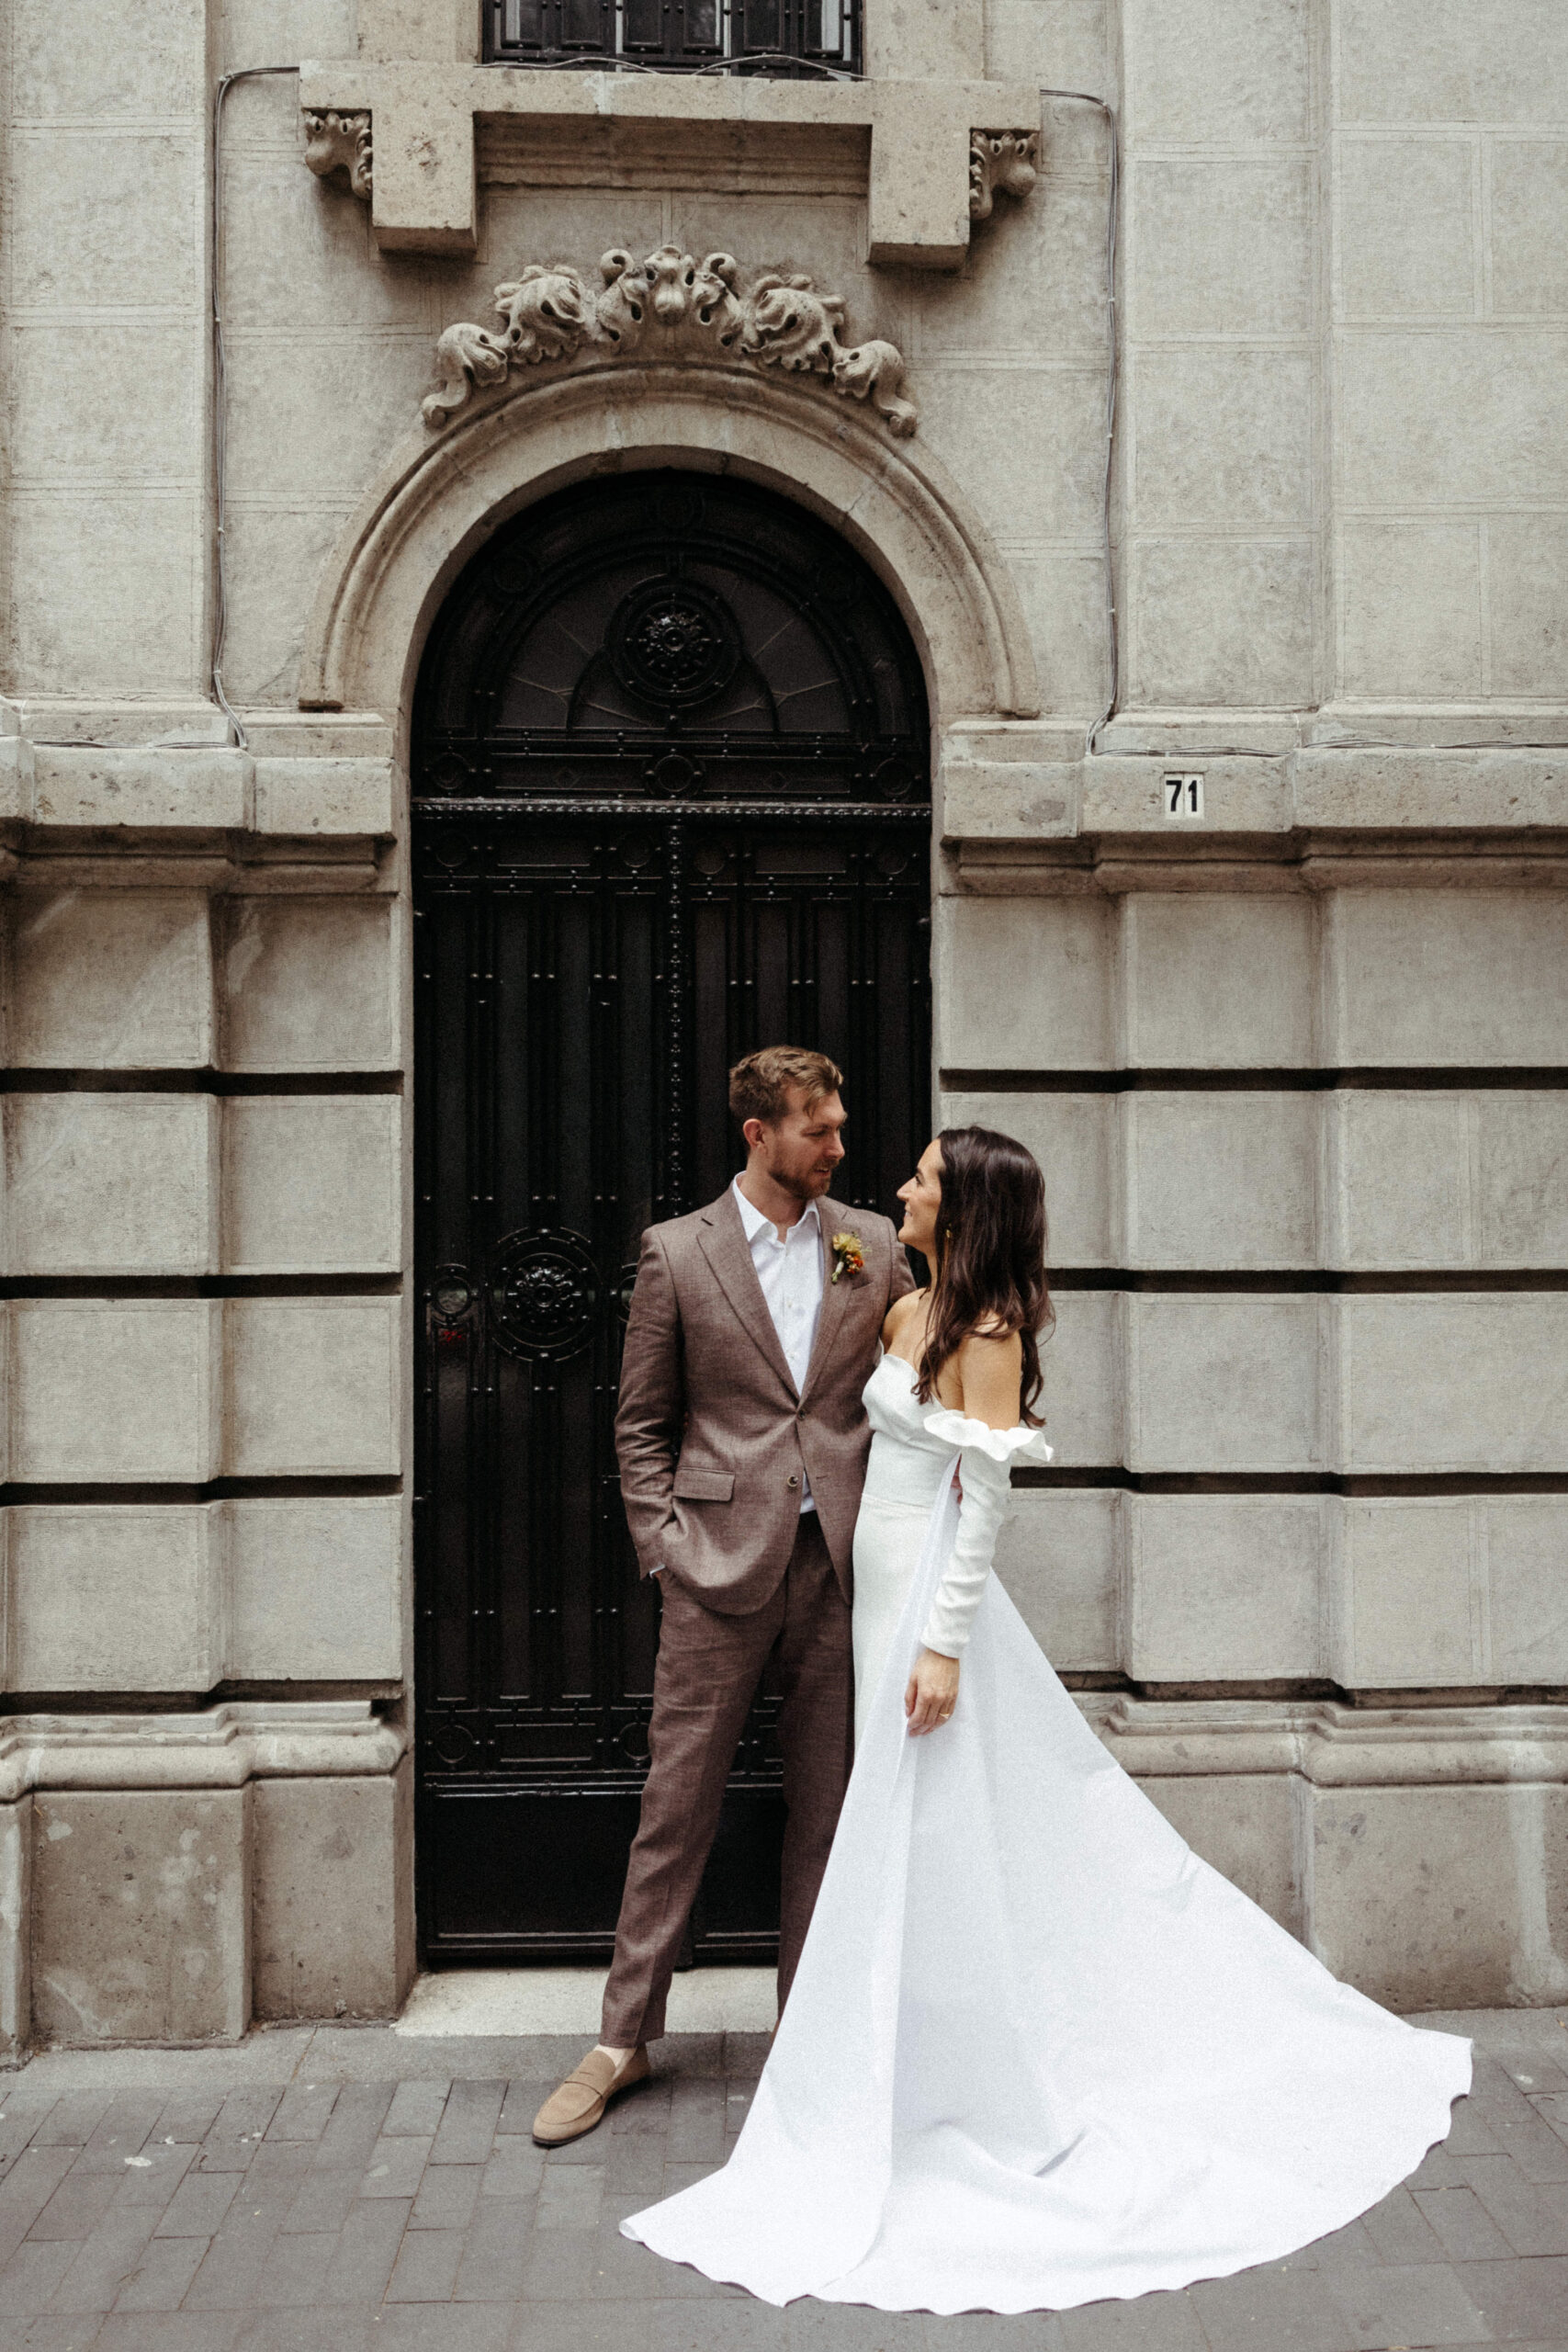 Stunning bride and groom photos with beautiful historic backdrops of Mexico City, Mexico!